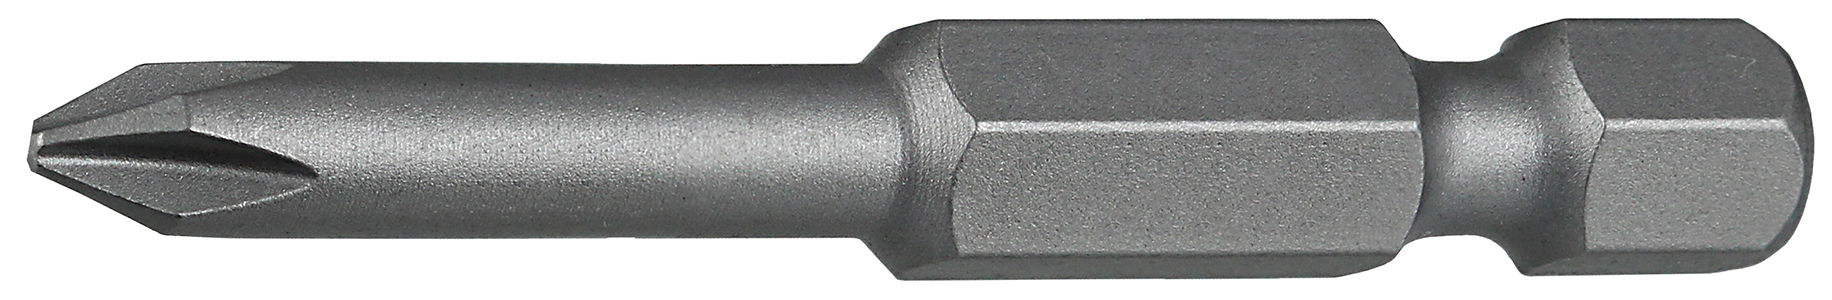 Insert Bit, #1 tip size, Phillips tip type, 1 in. overall length, Hex shank shape, #6 screw size